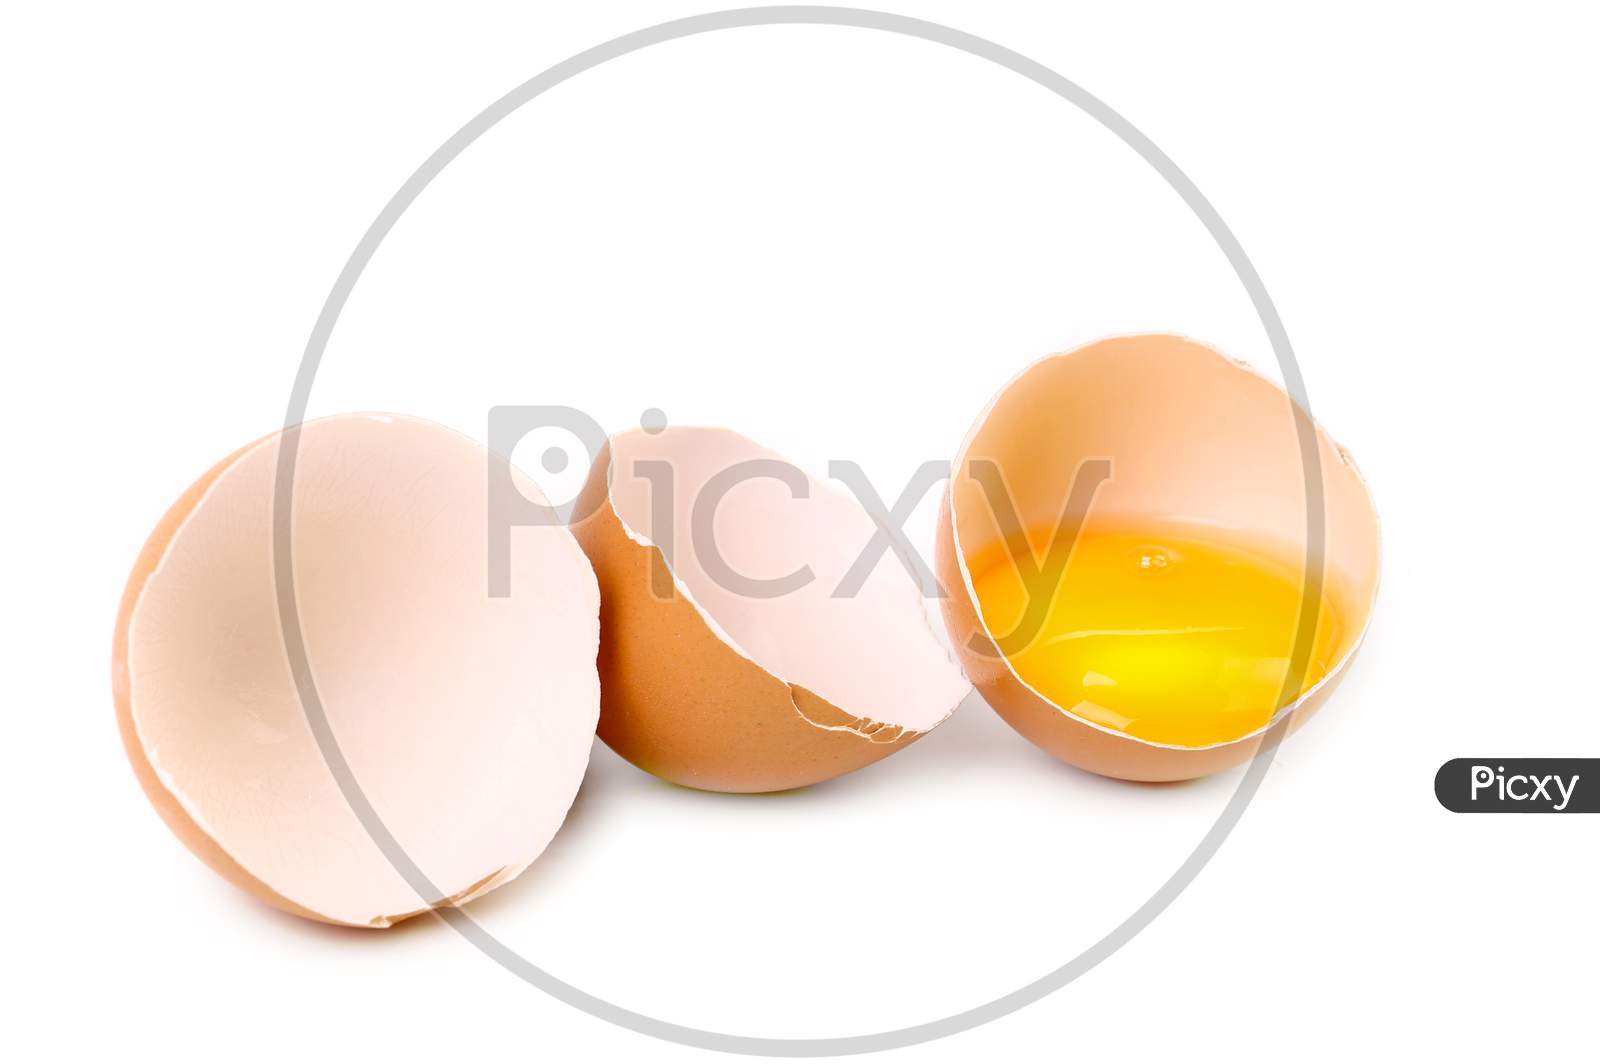 Close Up Of Broken Egg Half. Isolated On A White Background.